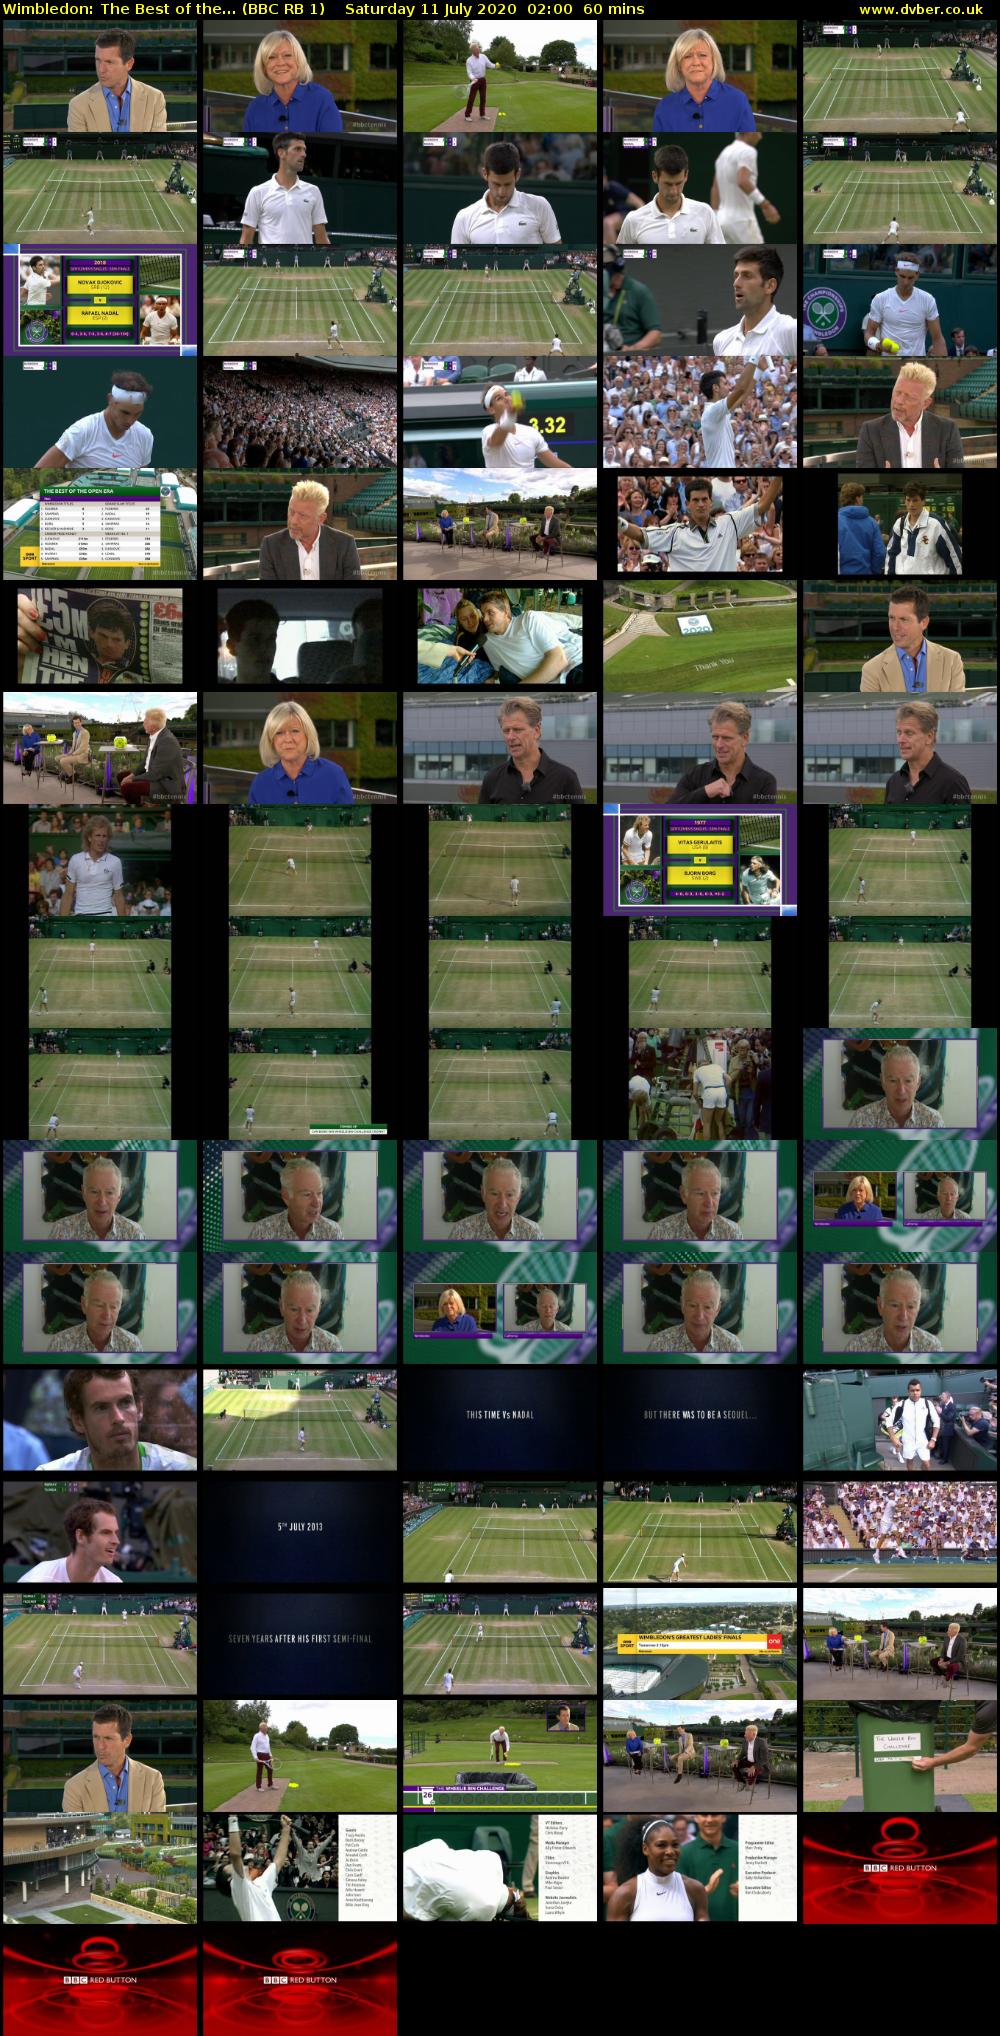 Wimbledon: The Best of the... (BBC RB 1) Saturday 11 July 2020 02:00 - 03:00